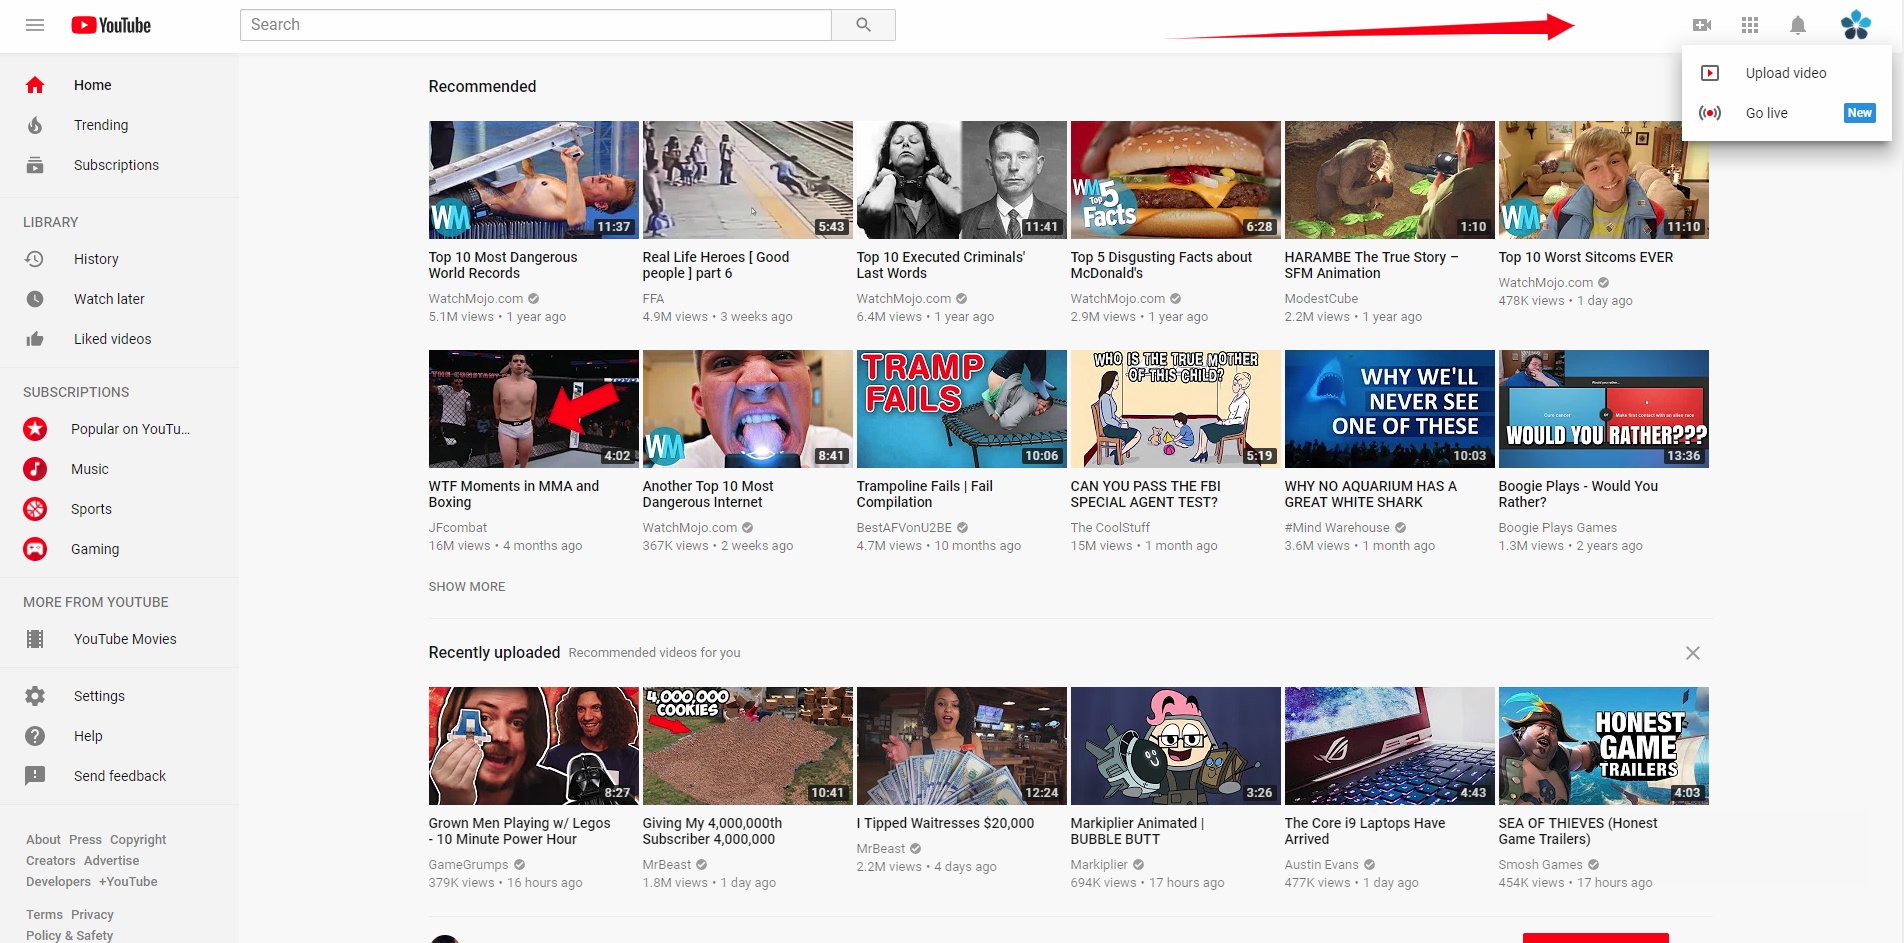 Youtube main website page